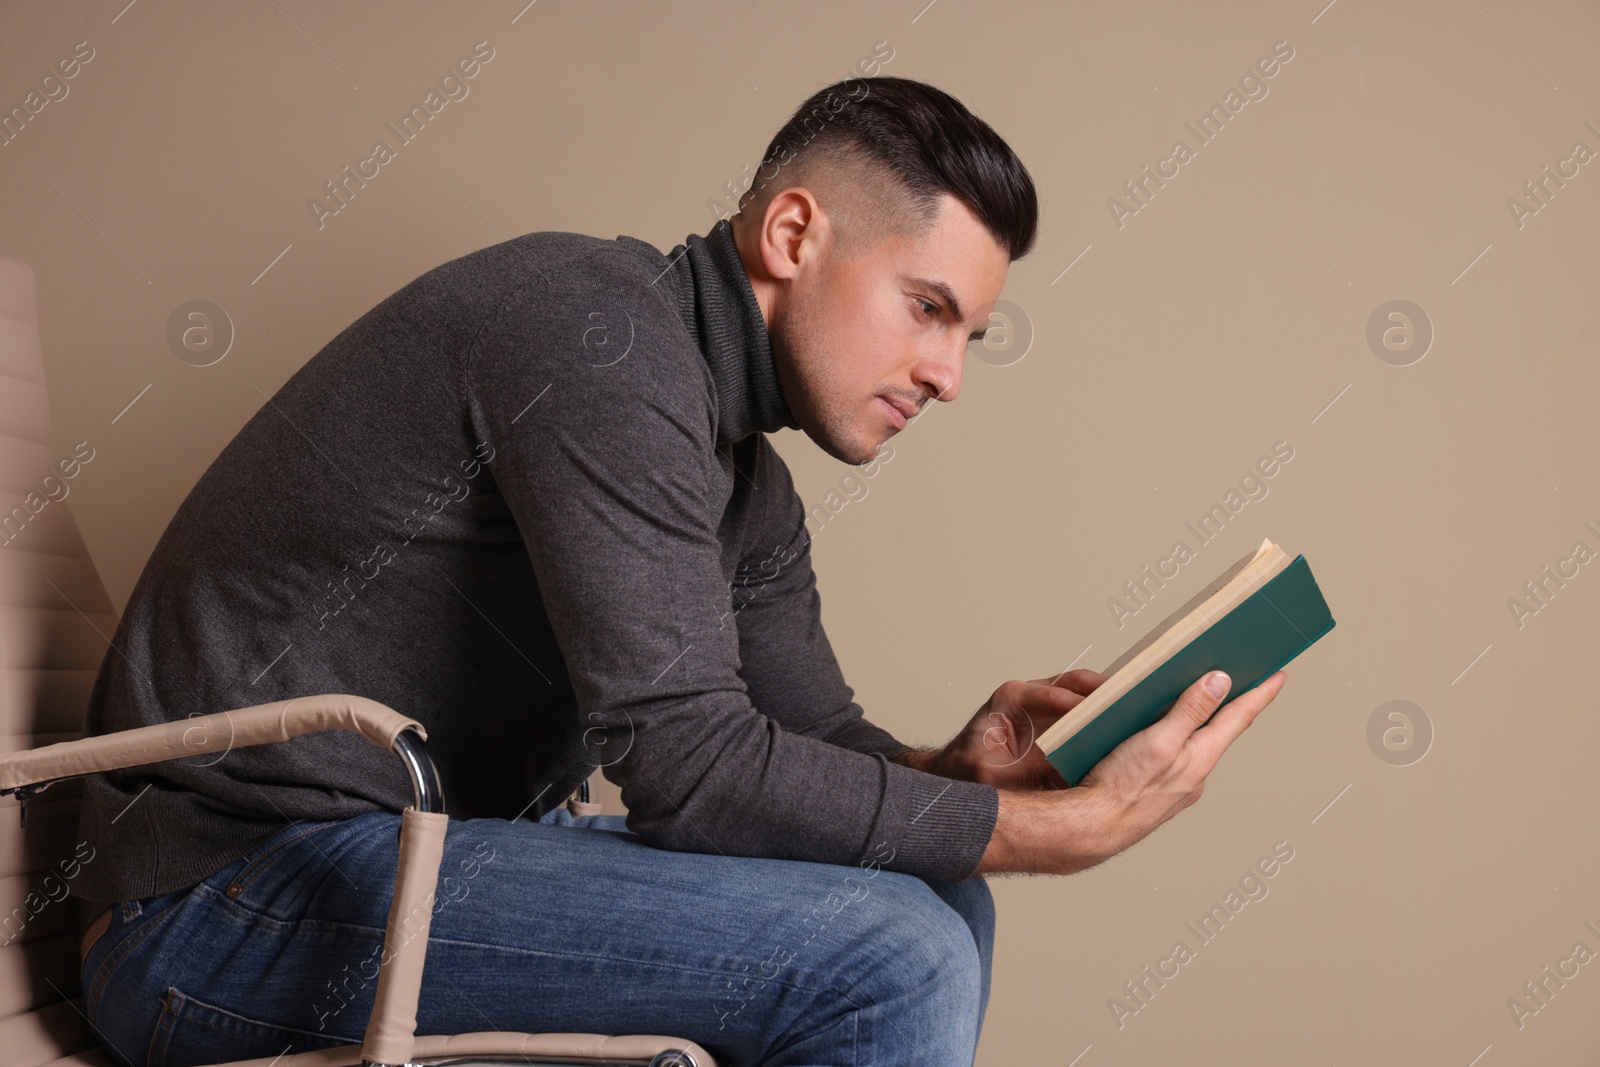 Photo of Man with poor posture reading book while sitting on chair against beige background